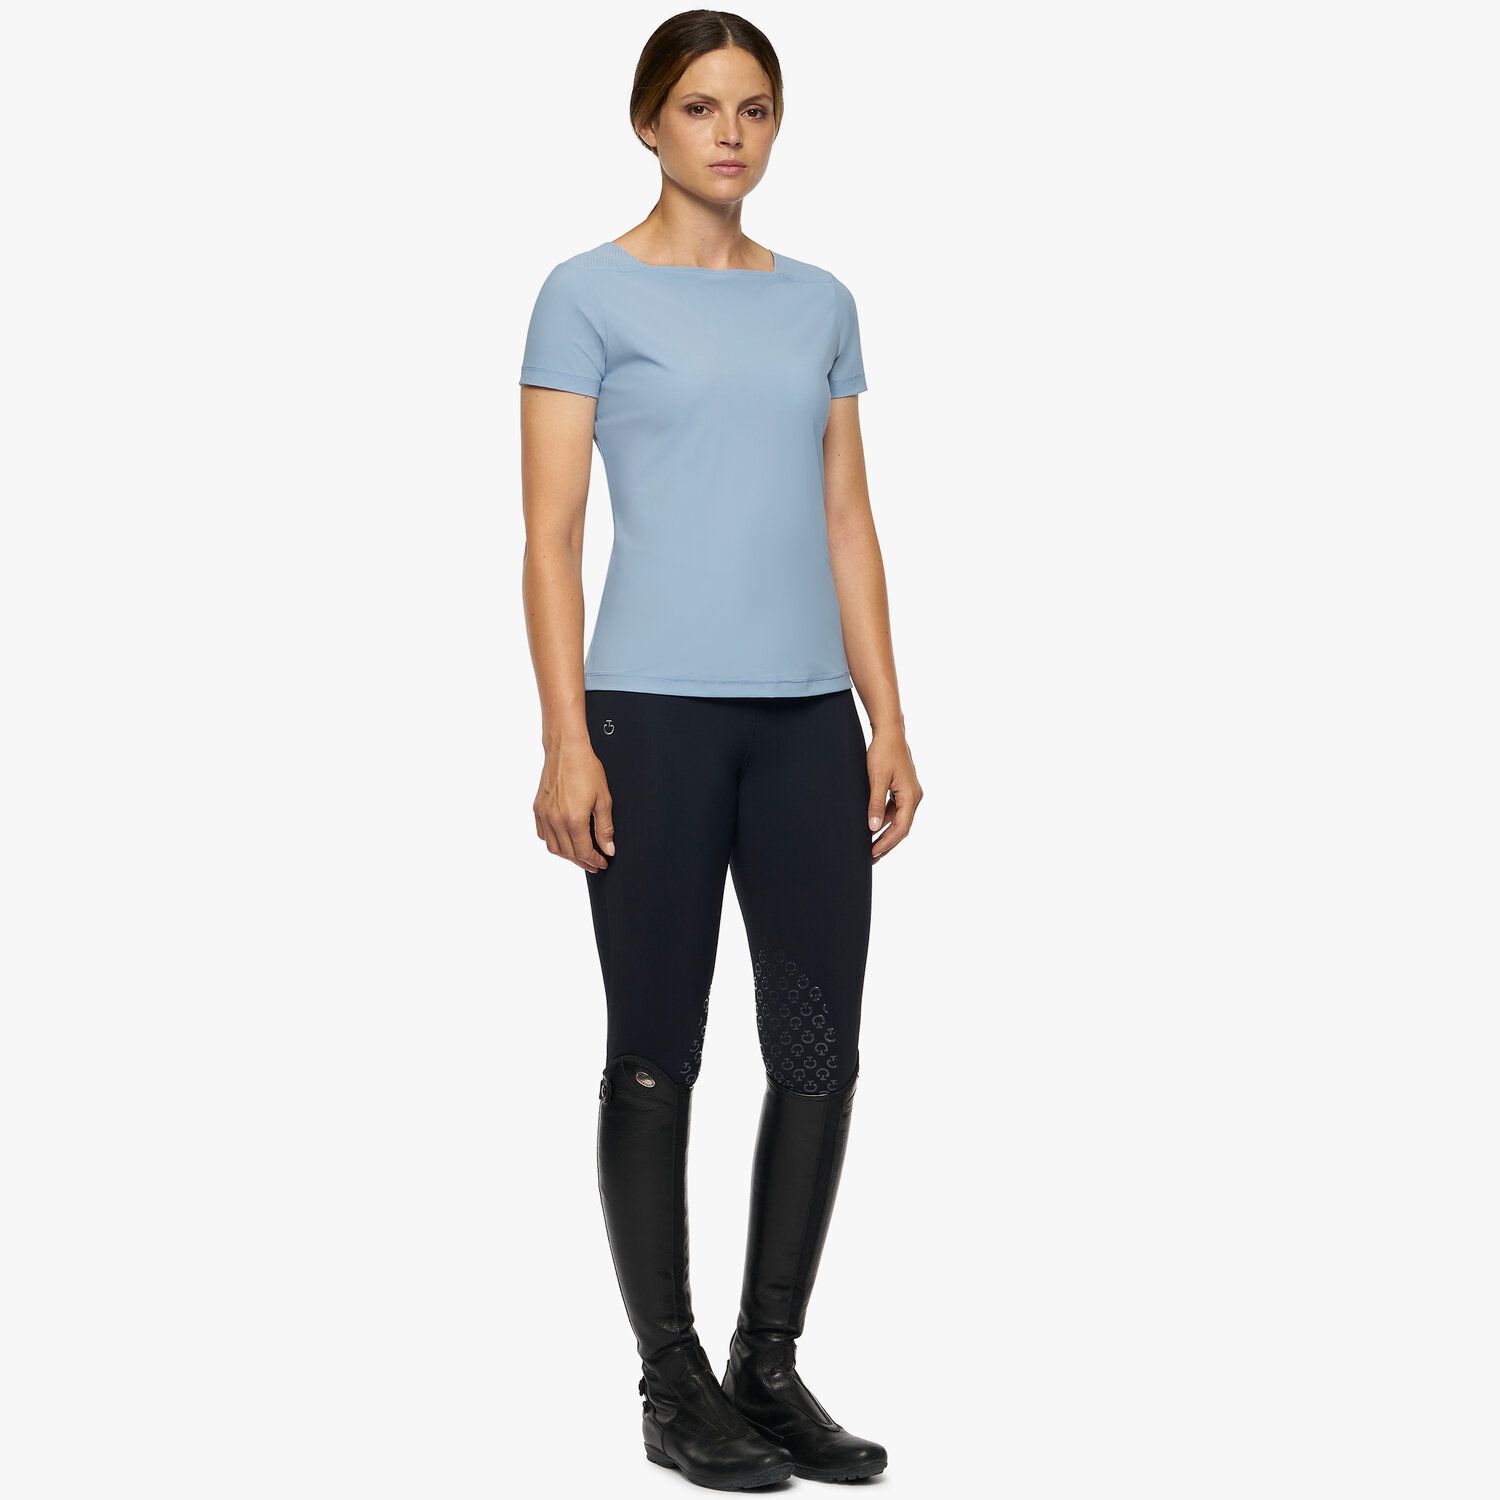 Cavalleria Toscana Women’s jersey t-shirt with perforated details Light blue-2